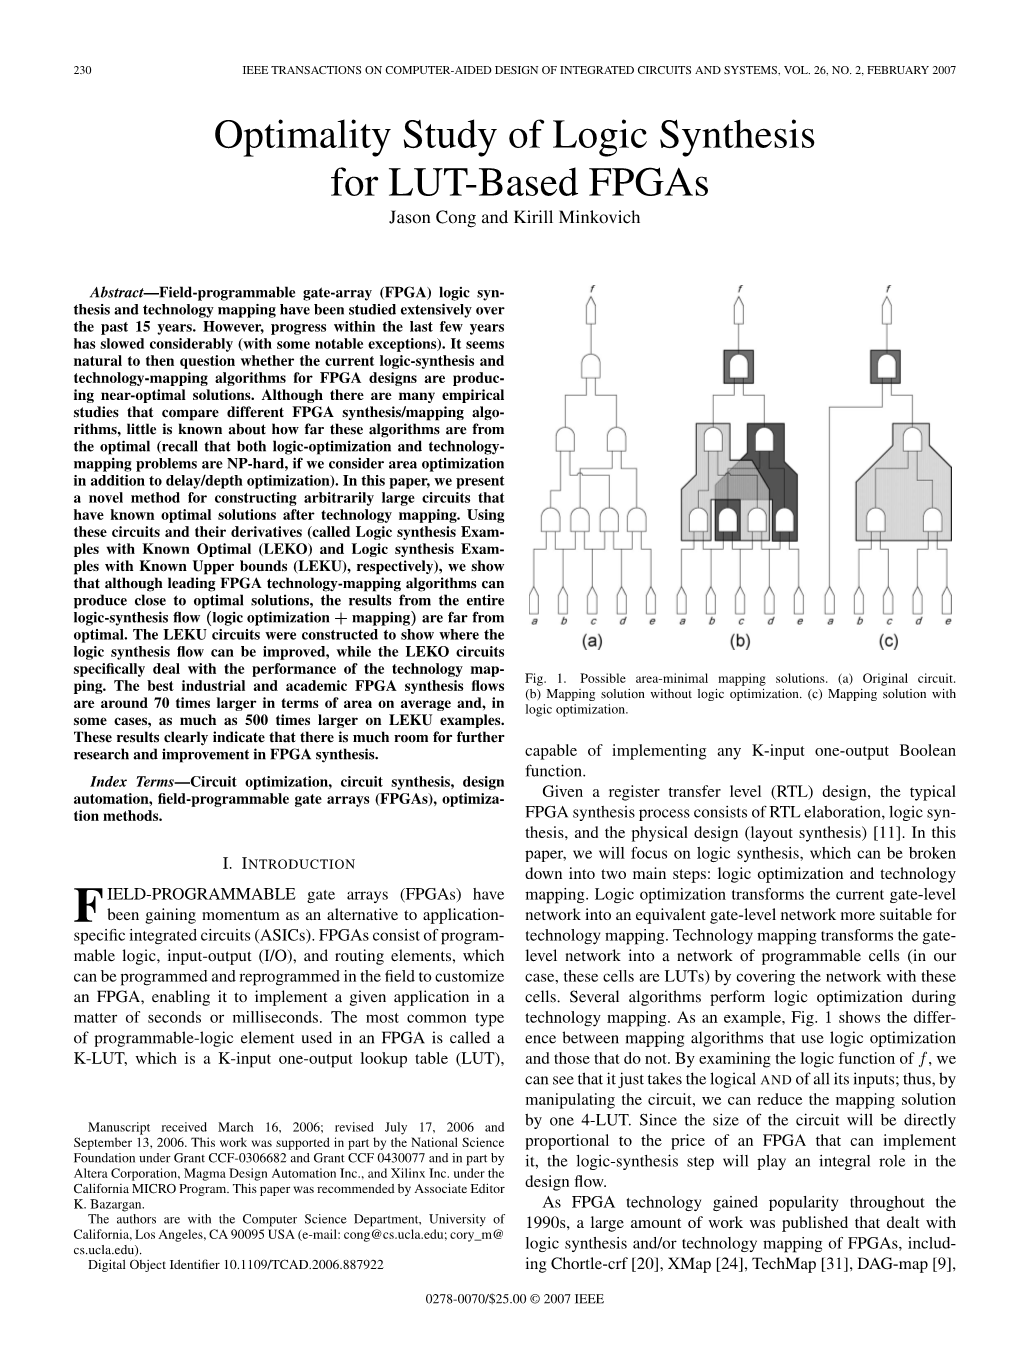 Optimality Study of Logic Synthesis for LUT-Based Fpgas Jason Cong and Kirill Minkovich